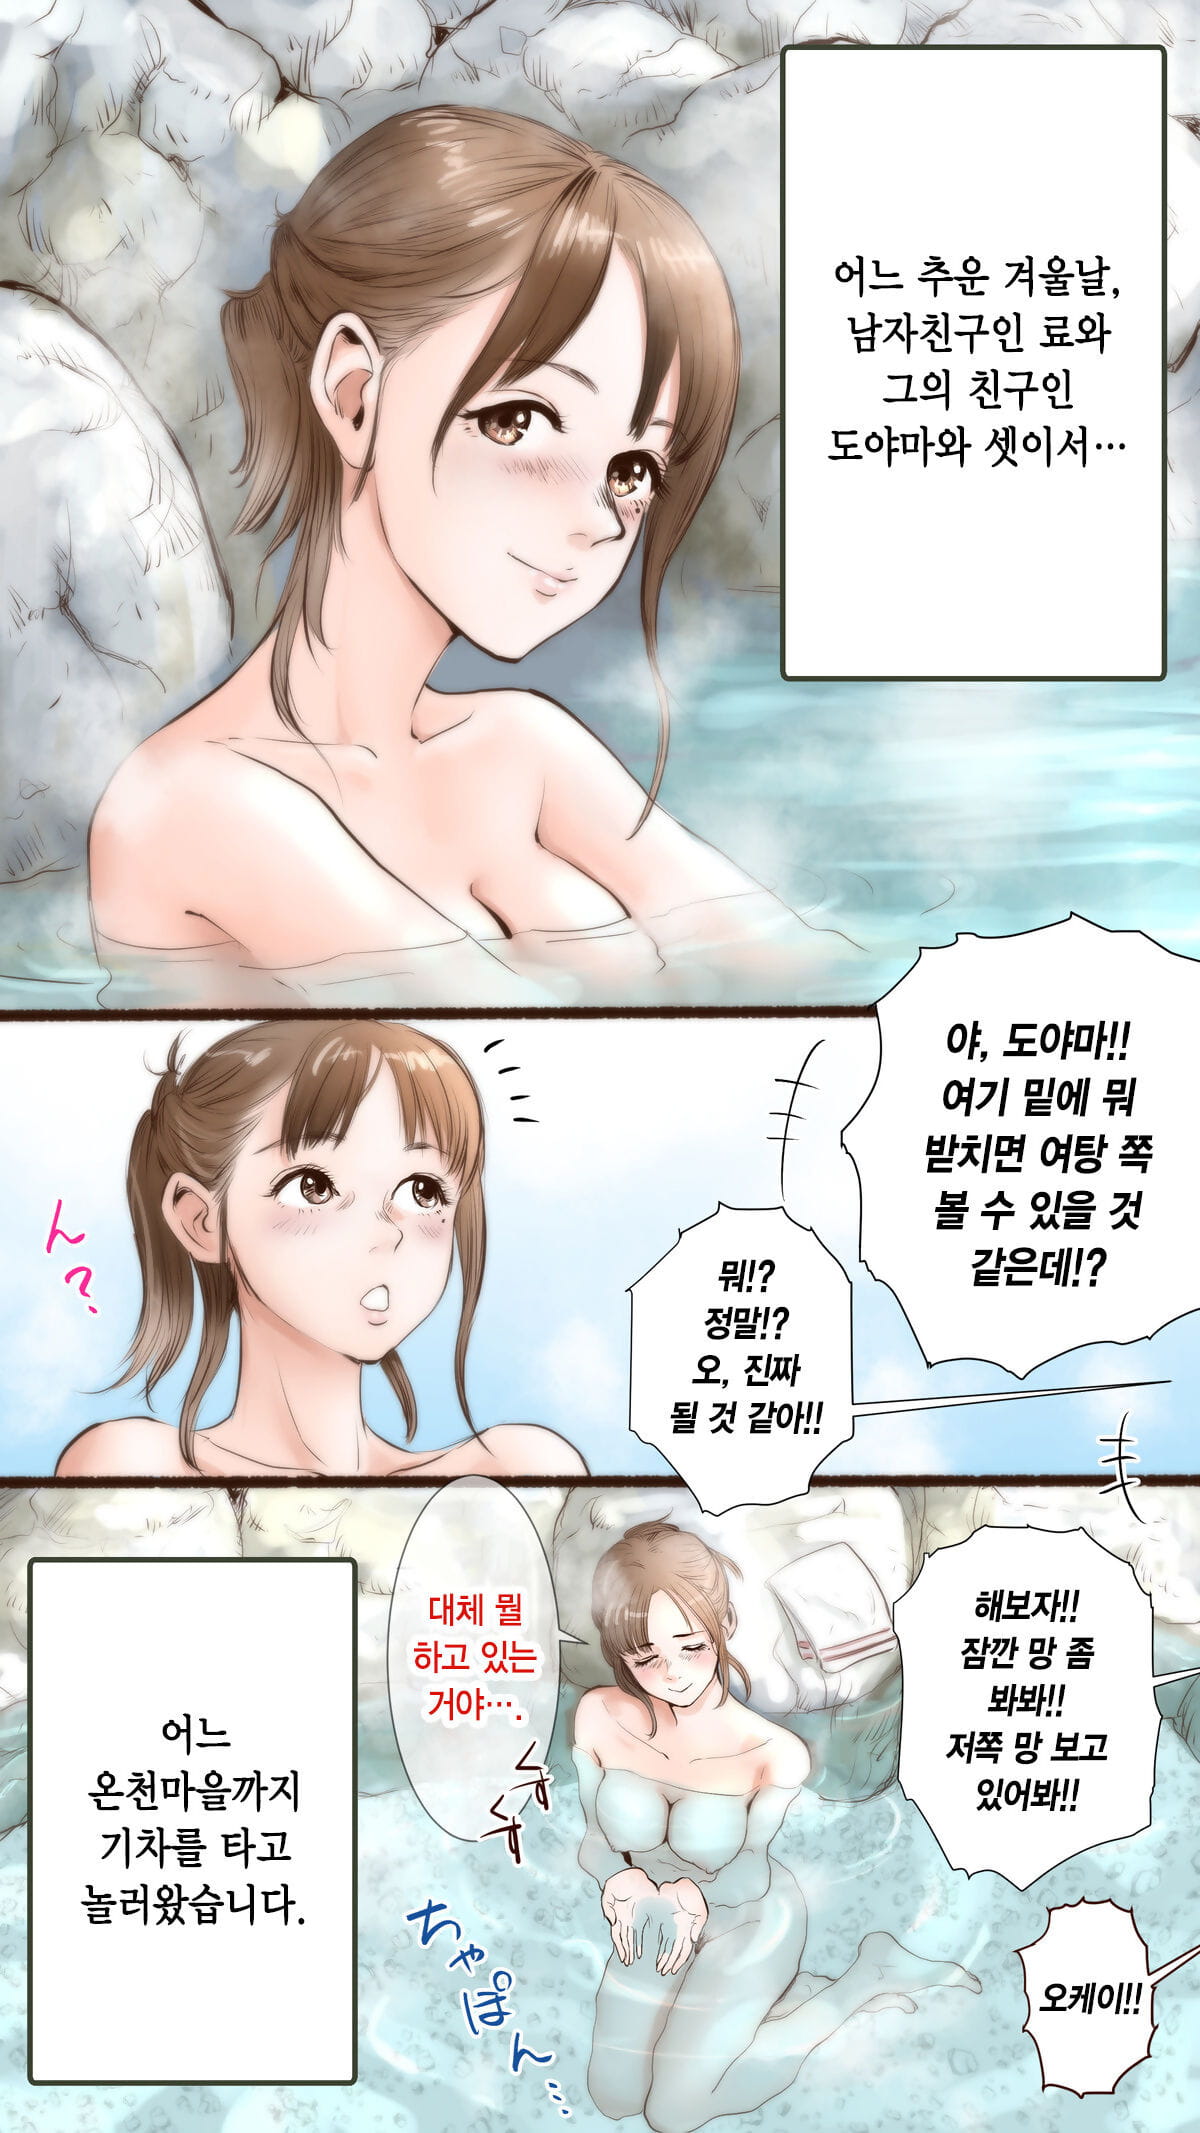 Story of Hot Spring Hotel page 1